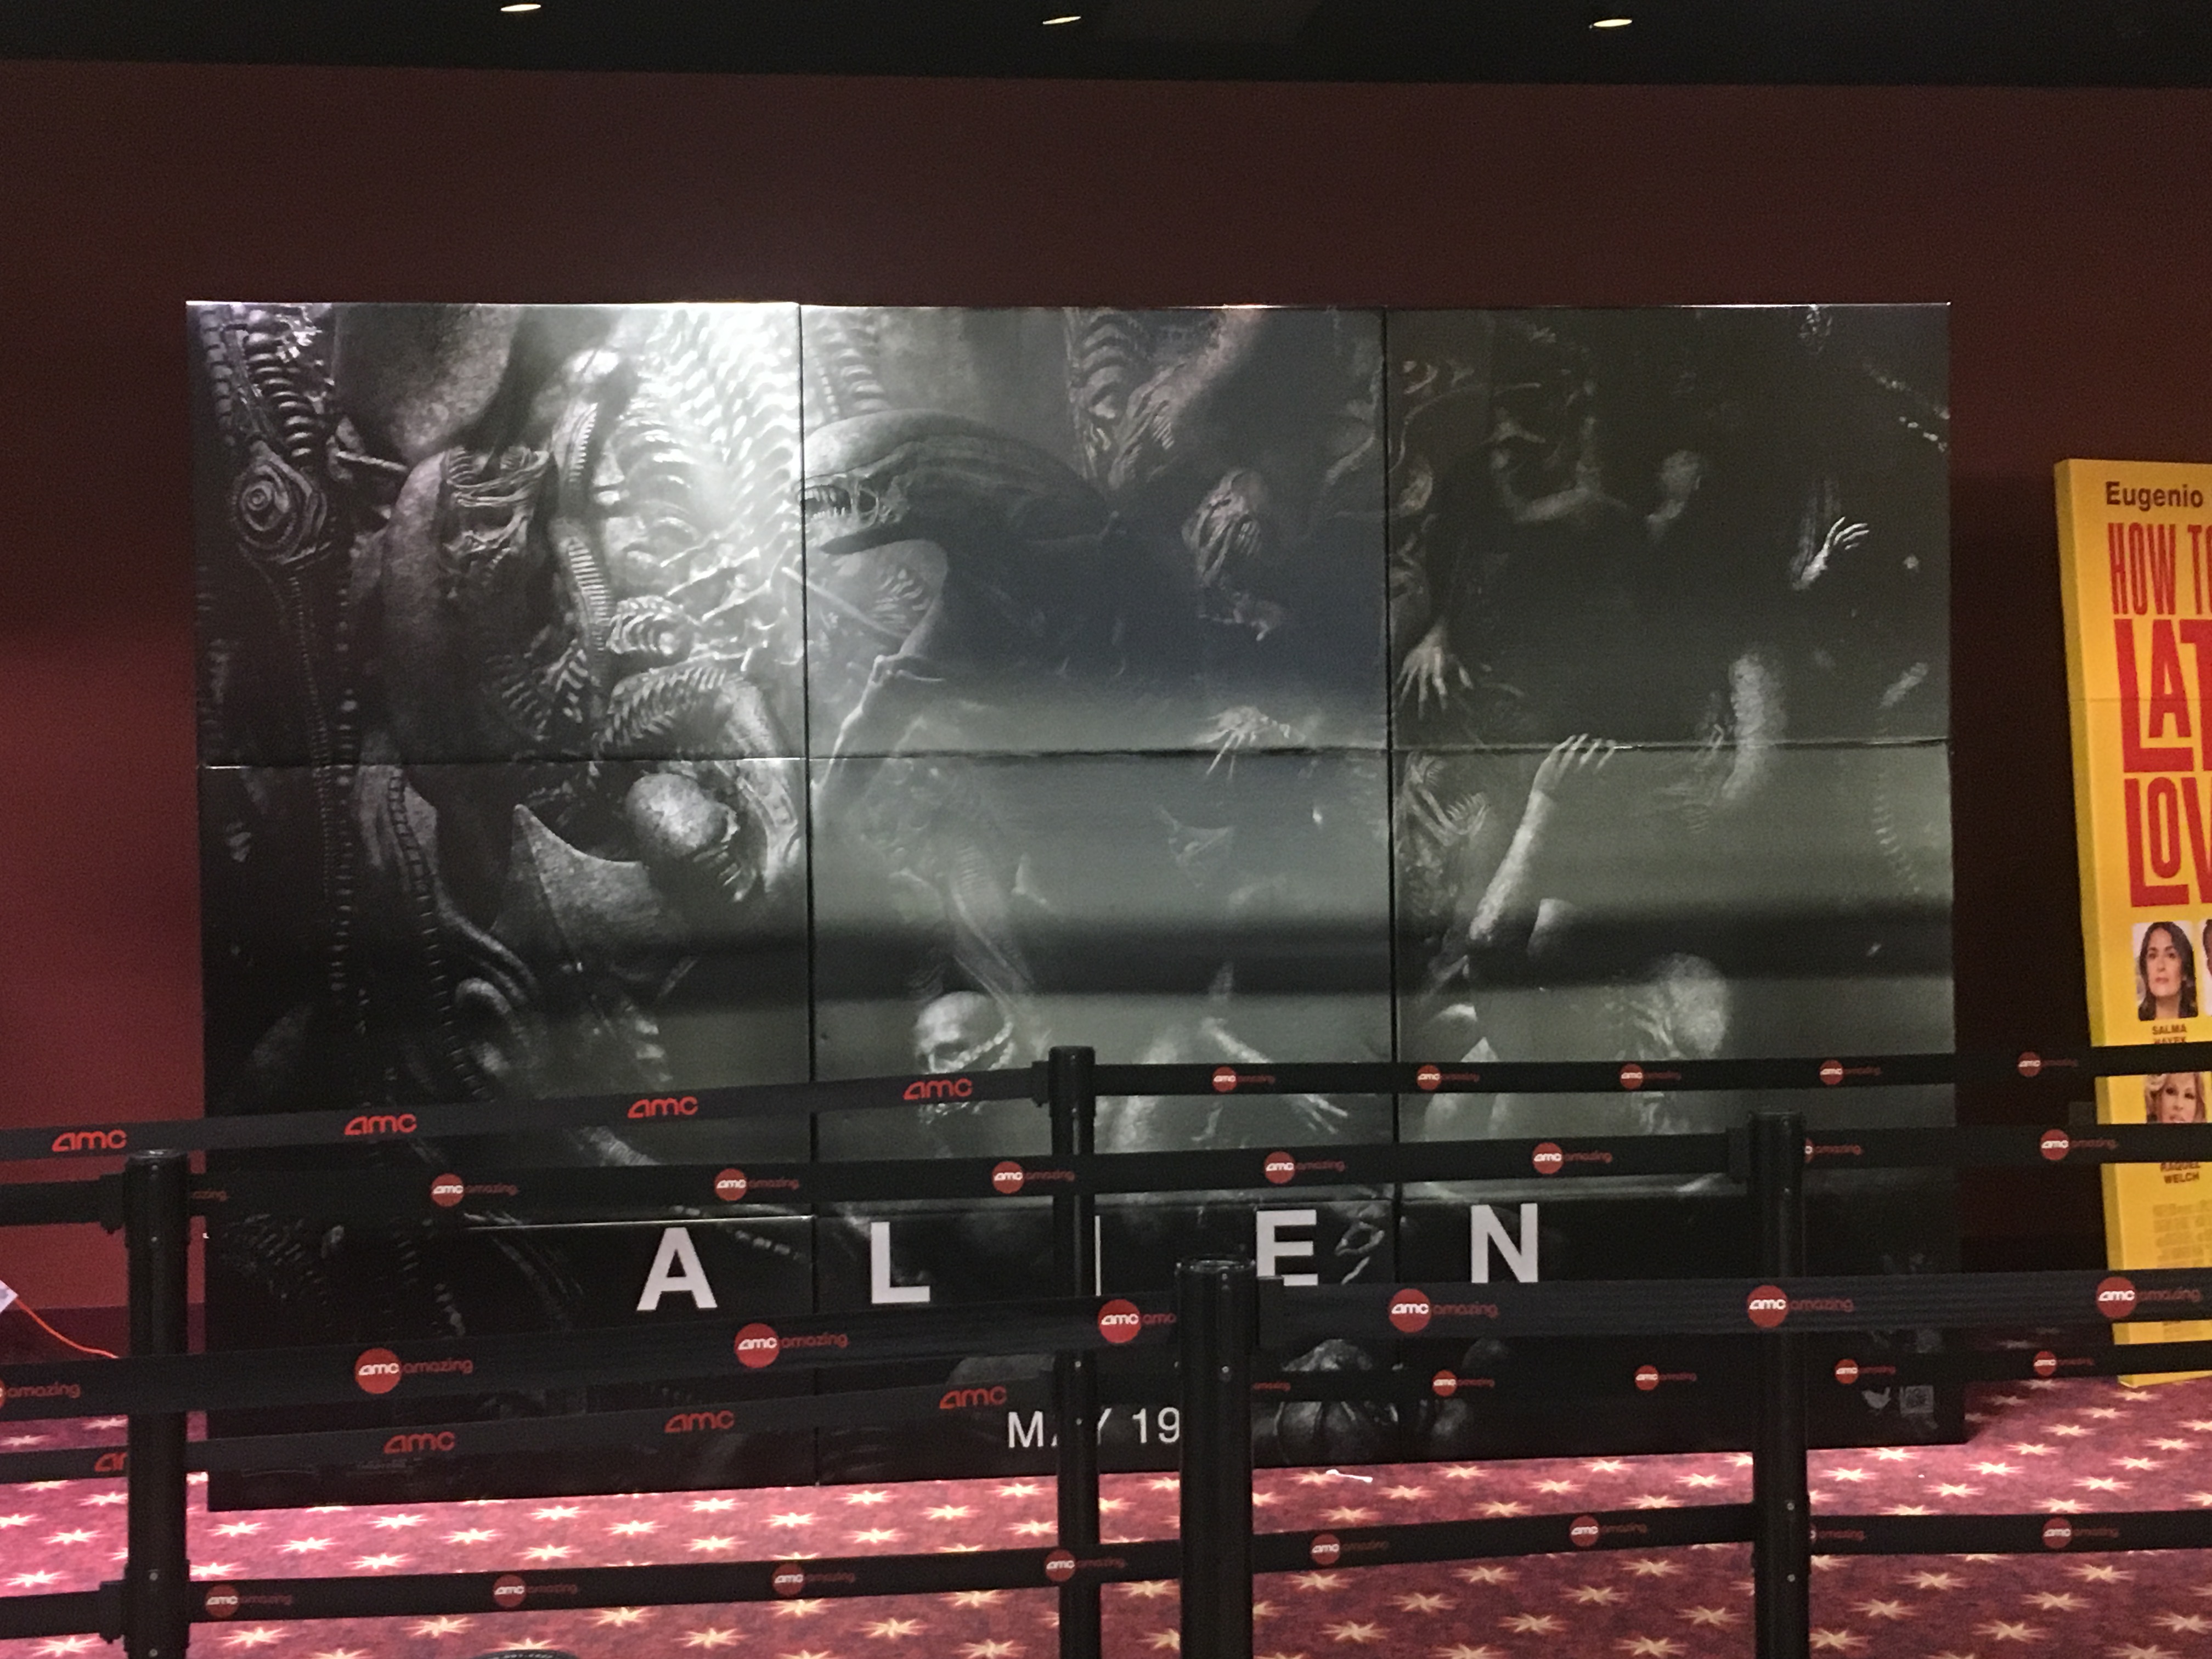 Alien Covenant Poster Board at AMC Theater